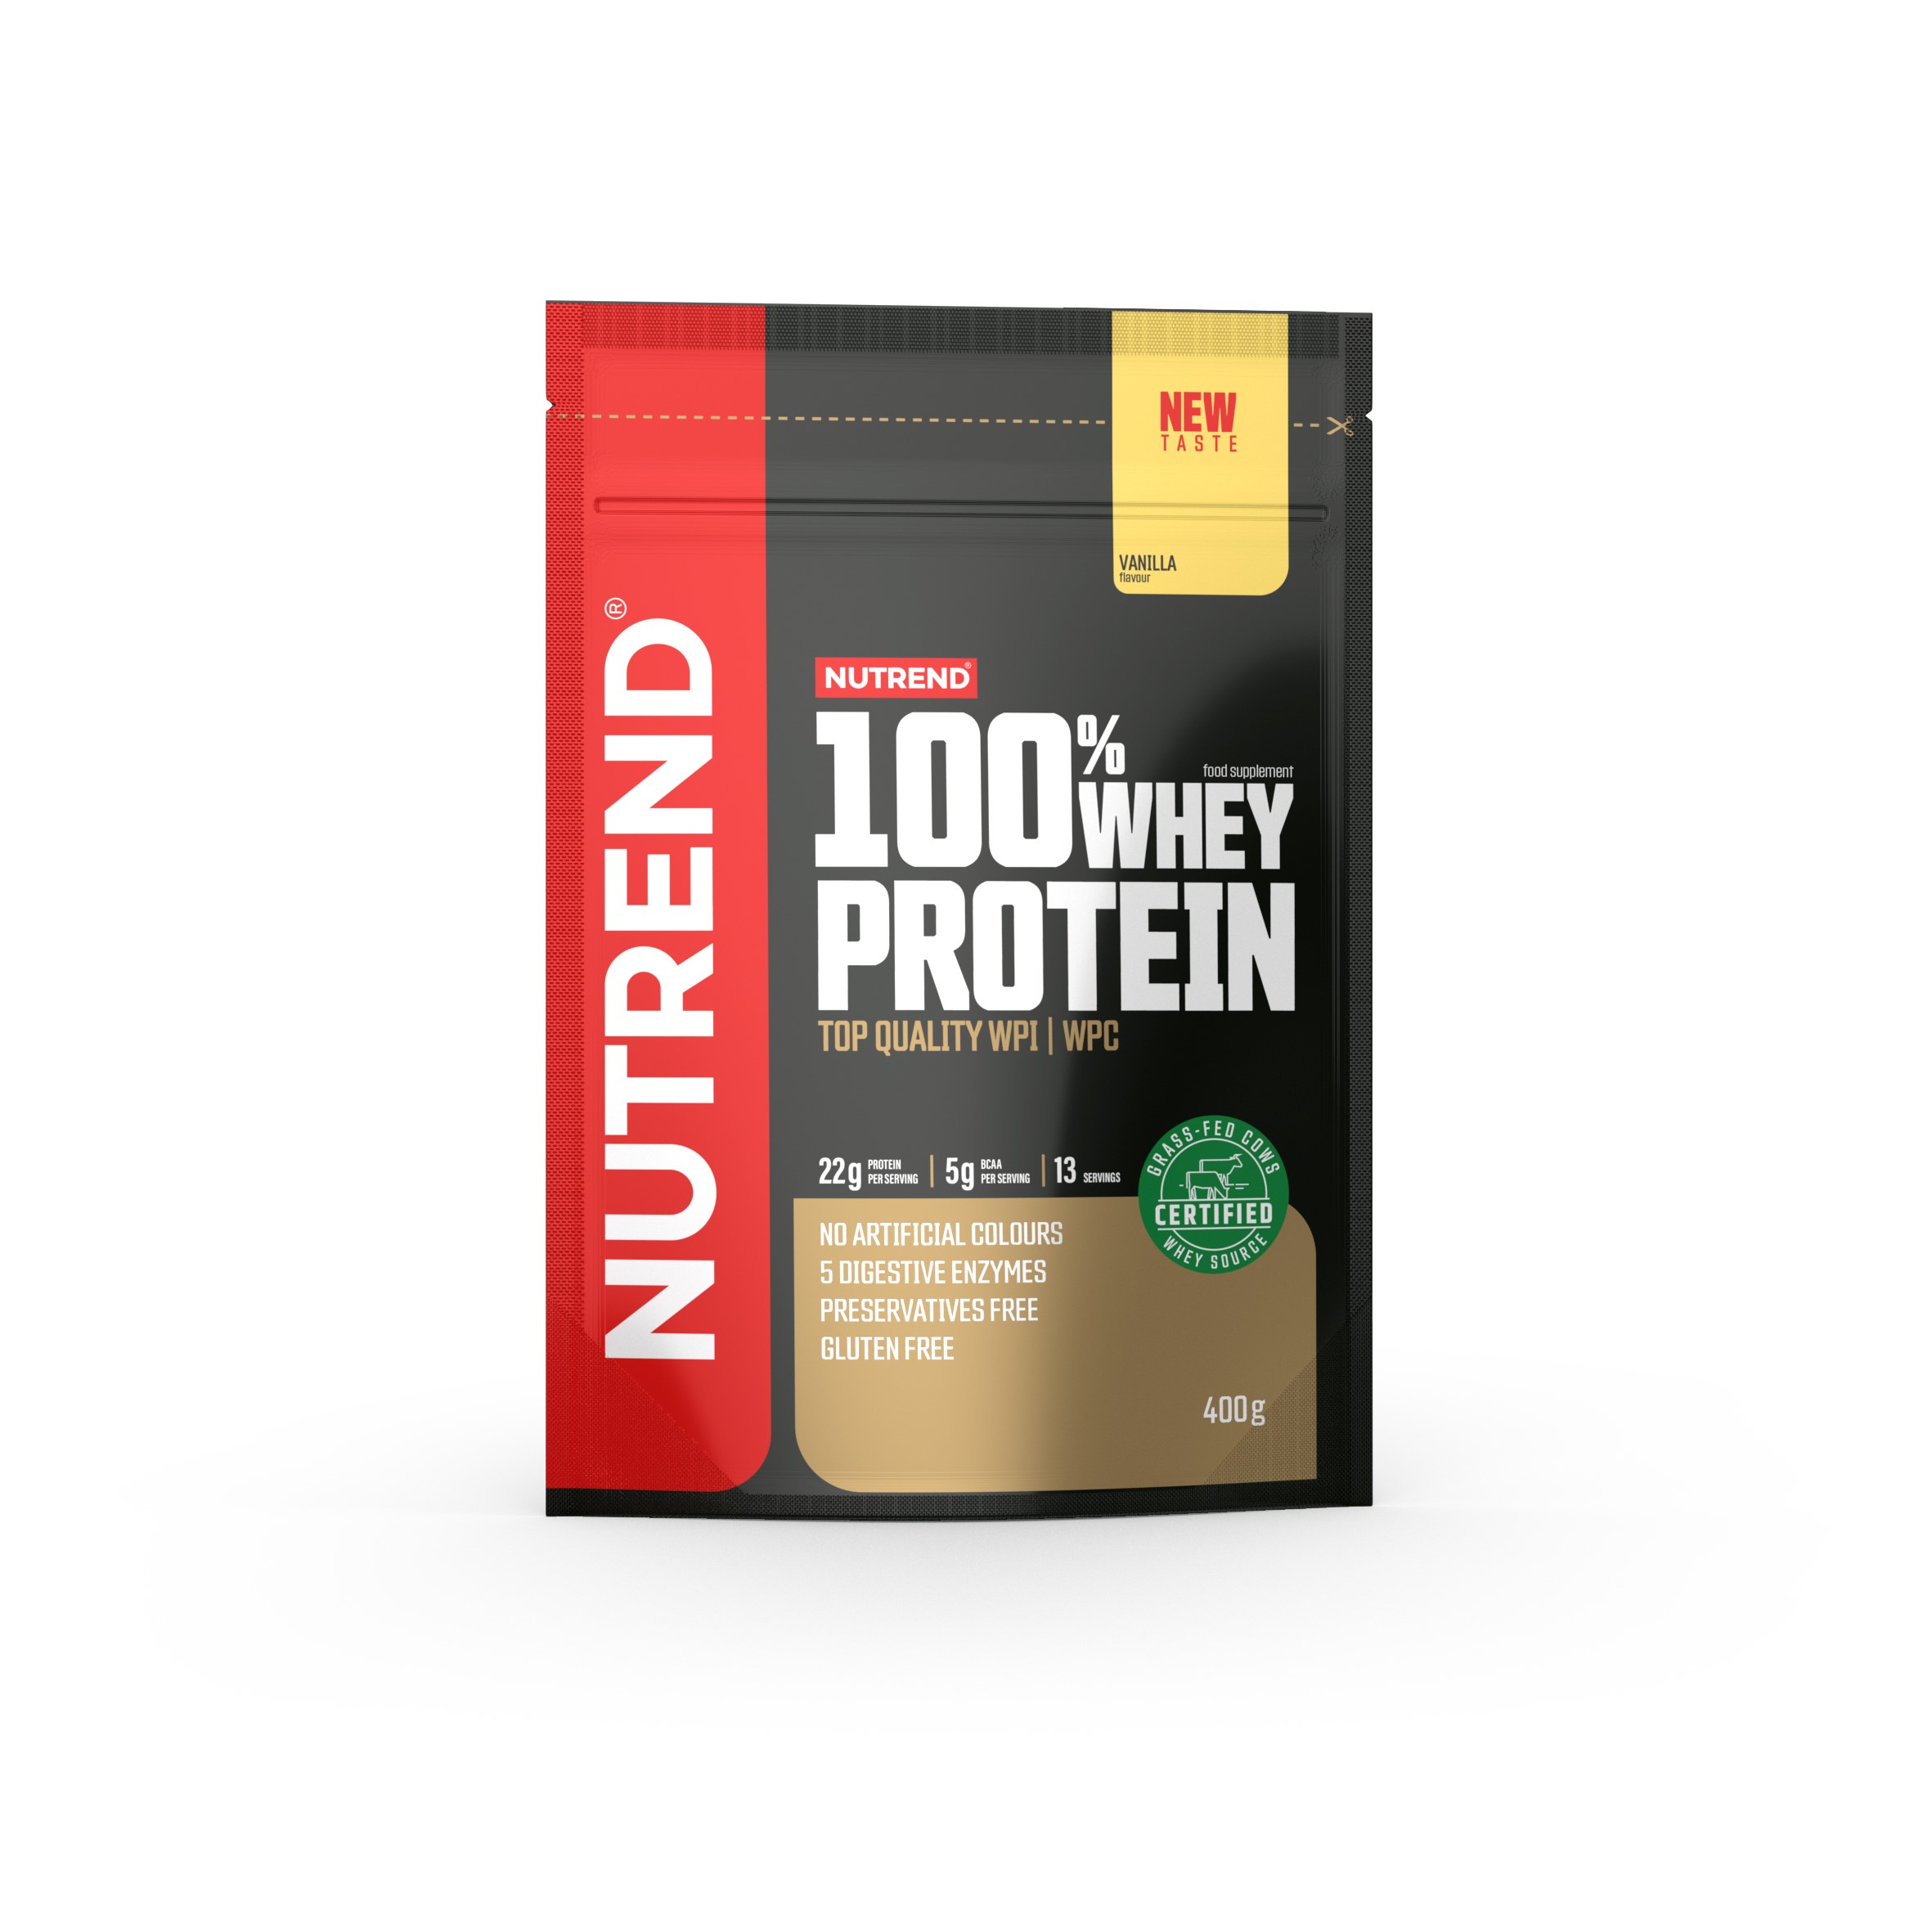 Concentrate Proteice - Nutrend 100% WHEY PROTEIN 400g Capsuni, advancednutrition.ro